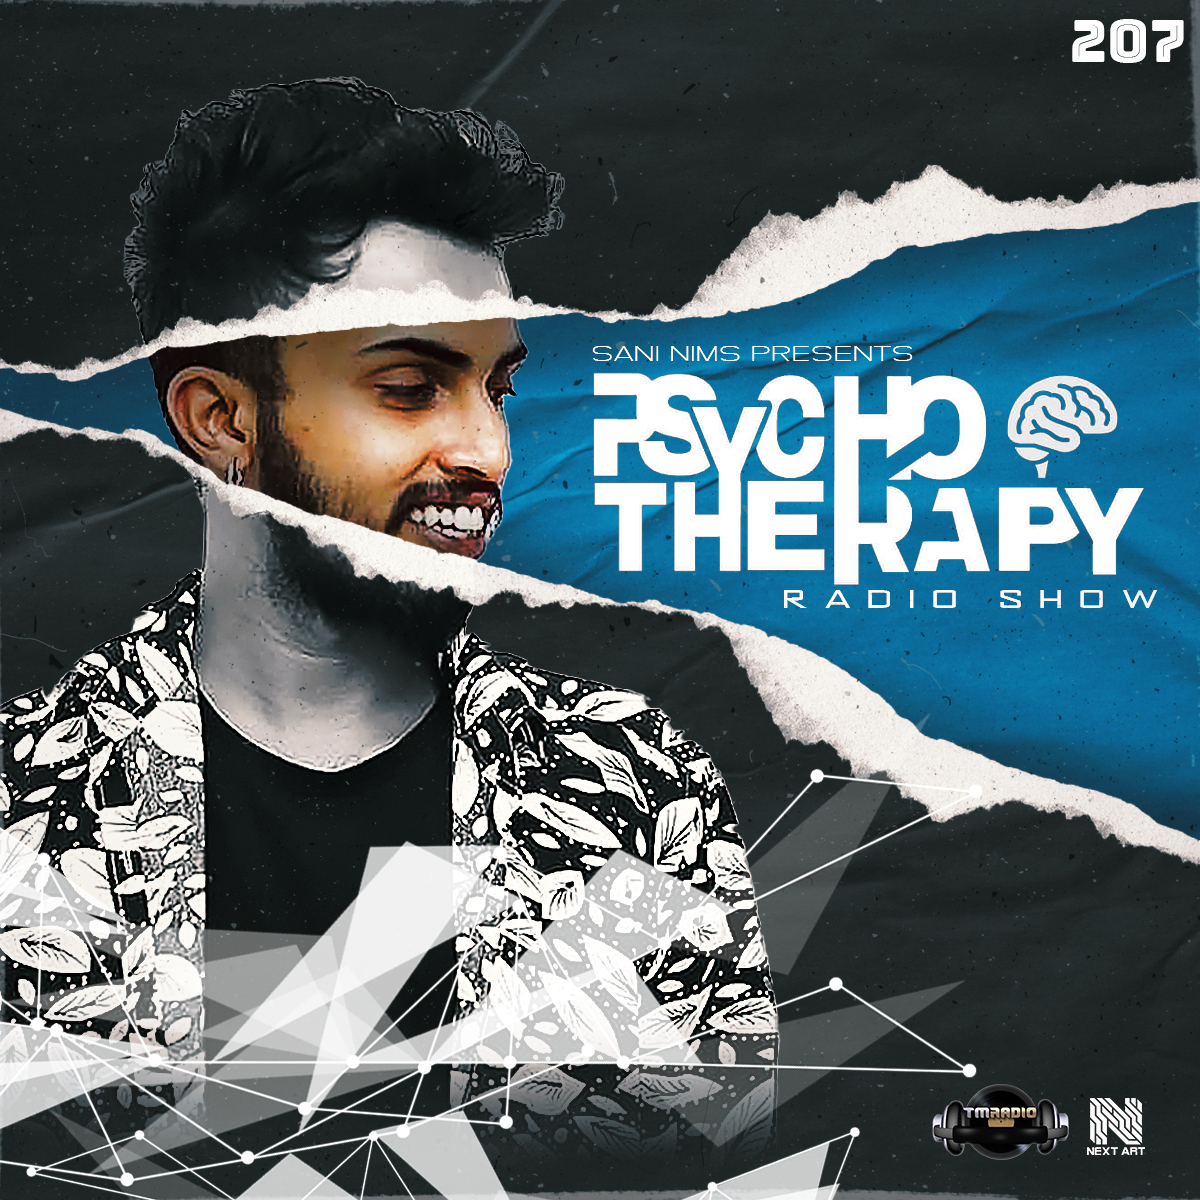 Psycho Therapy :: PSYCHO THERAPY EP 207 BY SANI NIMS ON TM RADIO (aired on September 21st) banner logo